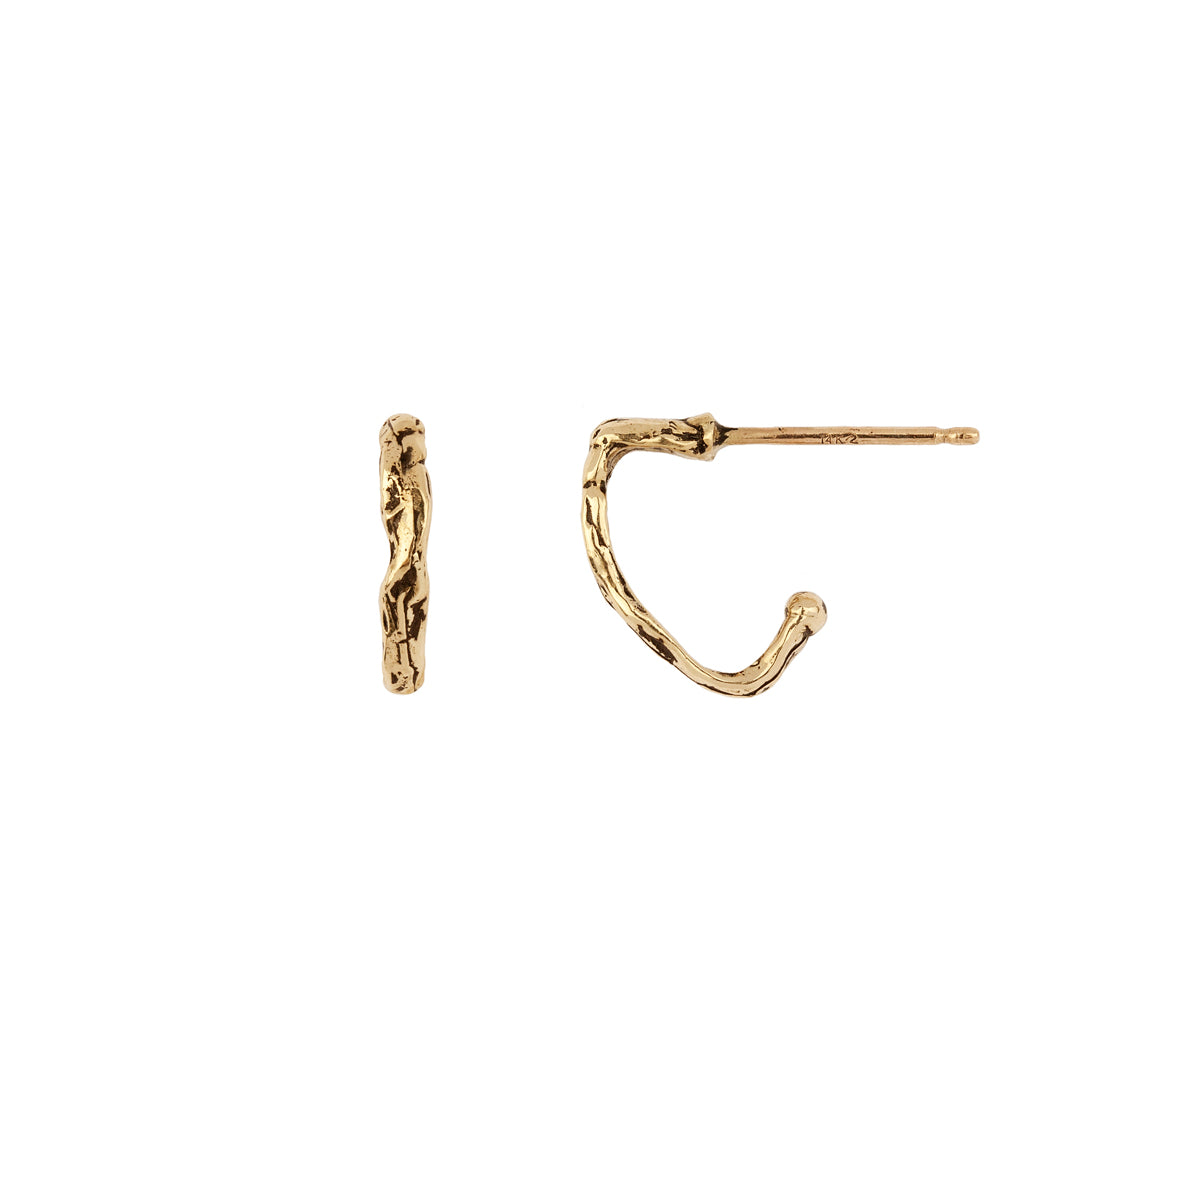 A set of extra small 14k gold hoop earrings with an open shield design.